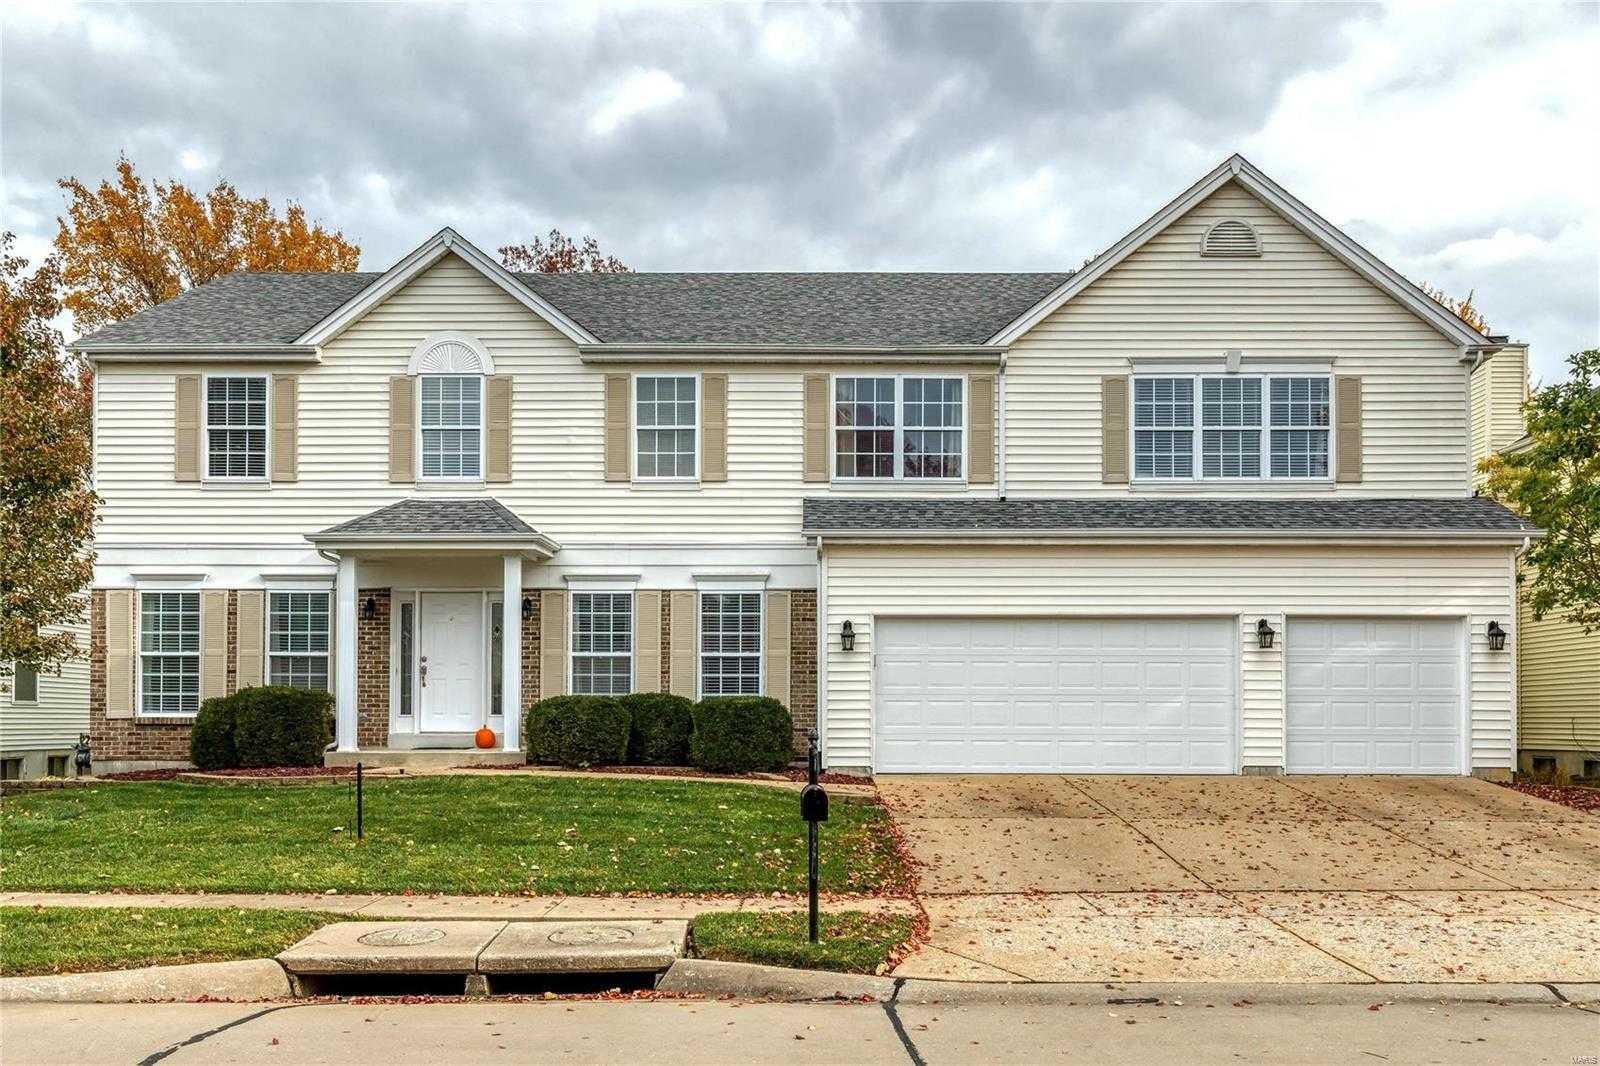 $595,000 - 4Br/4Ba -  for Sale in Manors At Bellerive Two, Creve Coeur